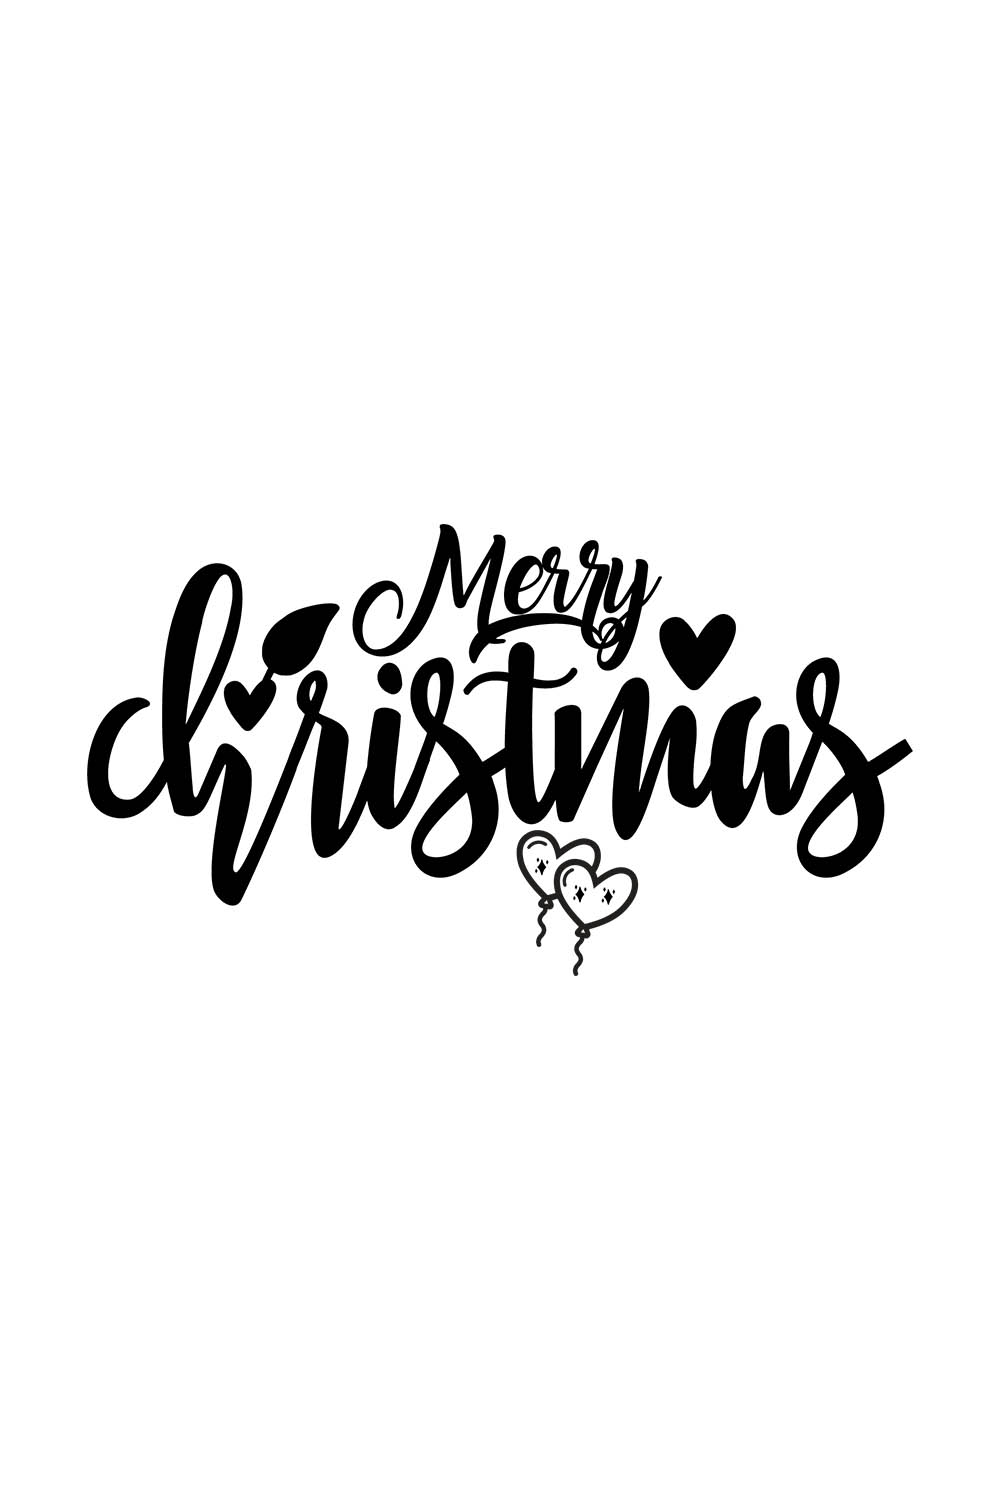 Image with a beautiful black inscription for Merry Christmas prints.